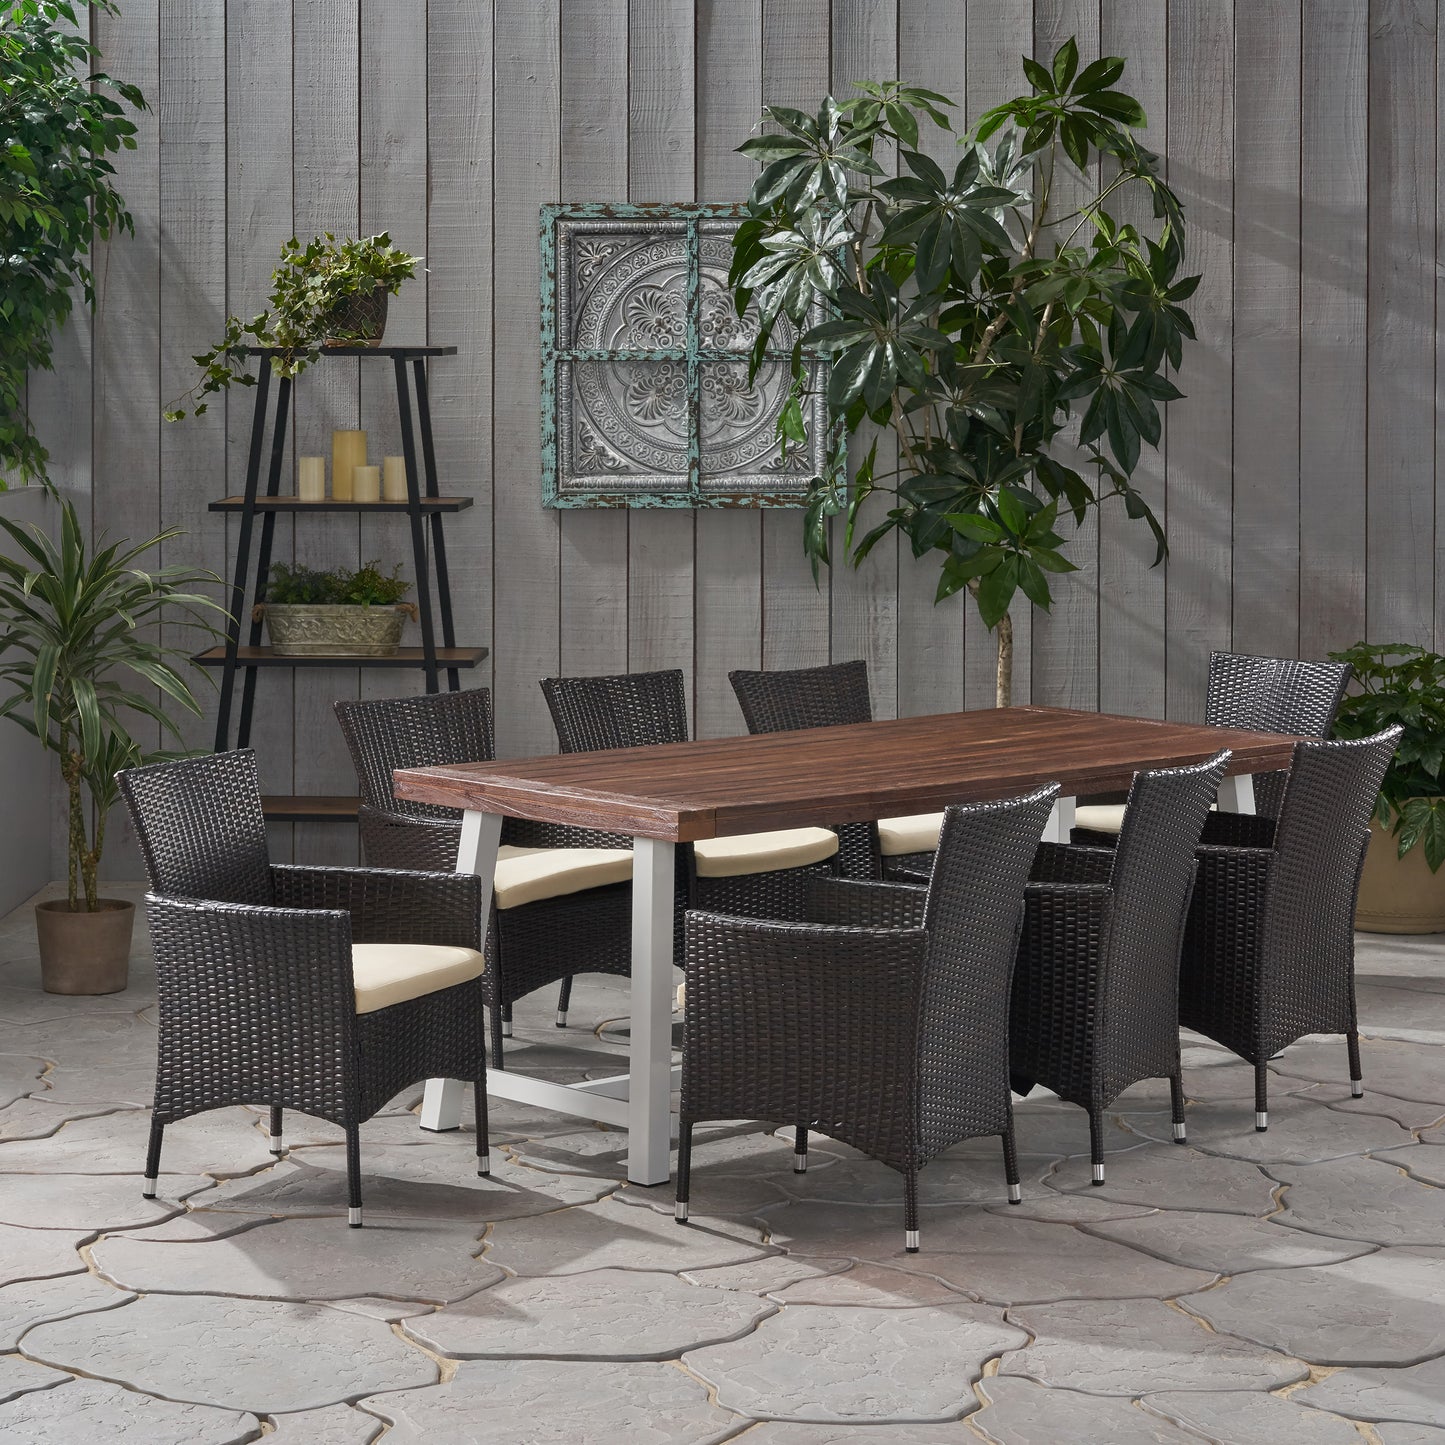 Mayson Outdoor Wood and Wicker 8 Seater Dining Set